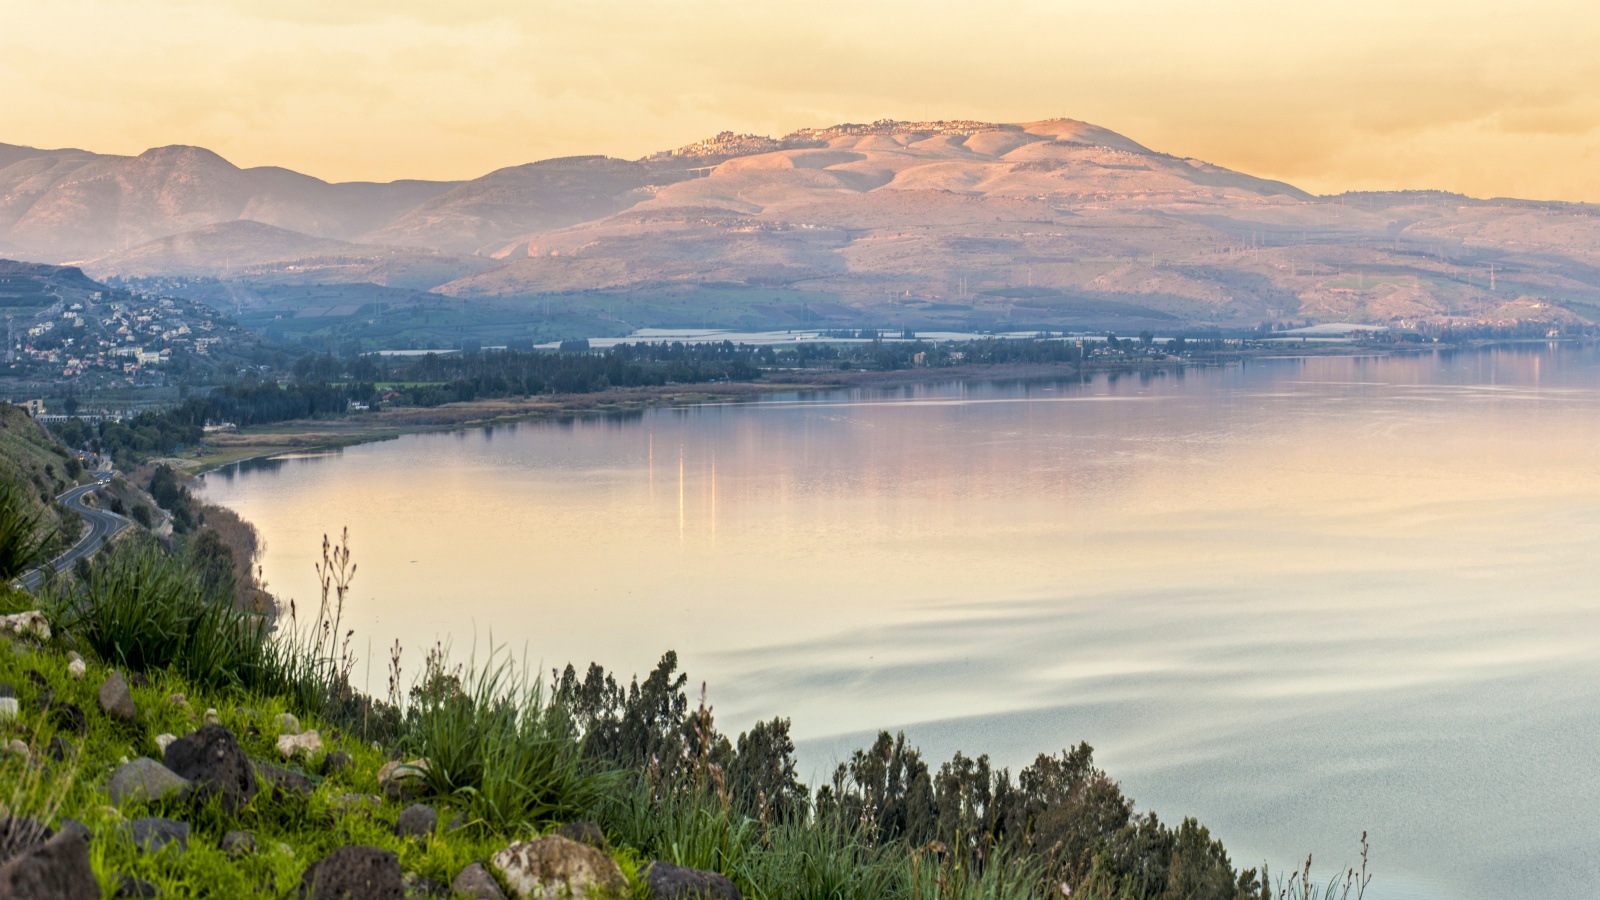 Sunset at the Sea of Galilee. Photo by Max Shamota/Shutterstock